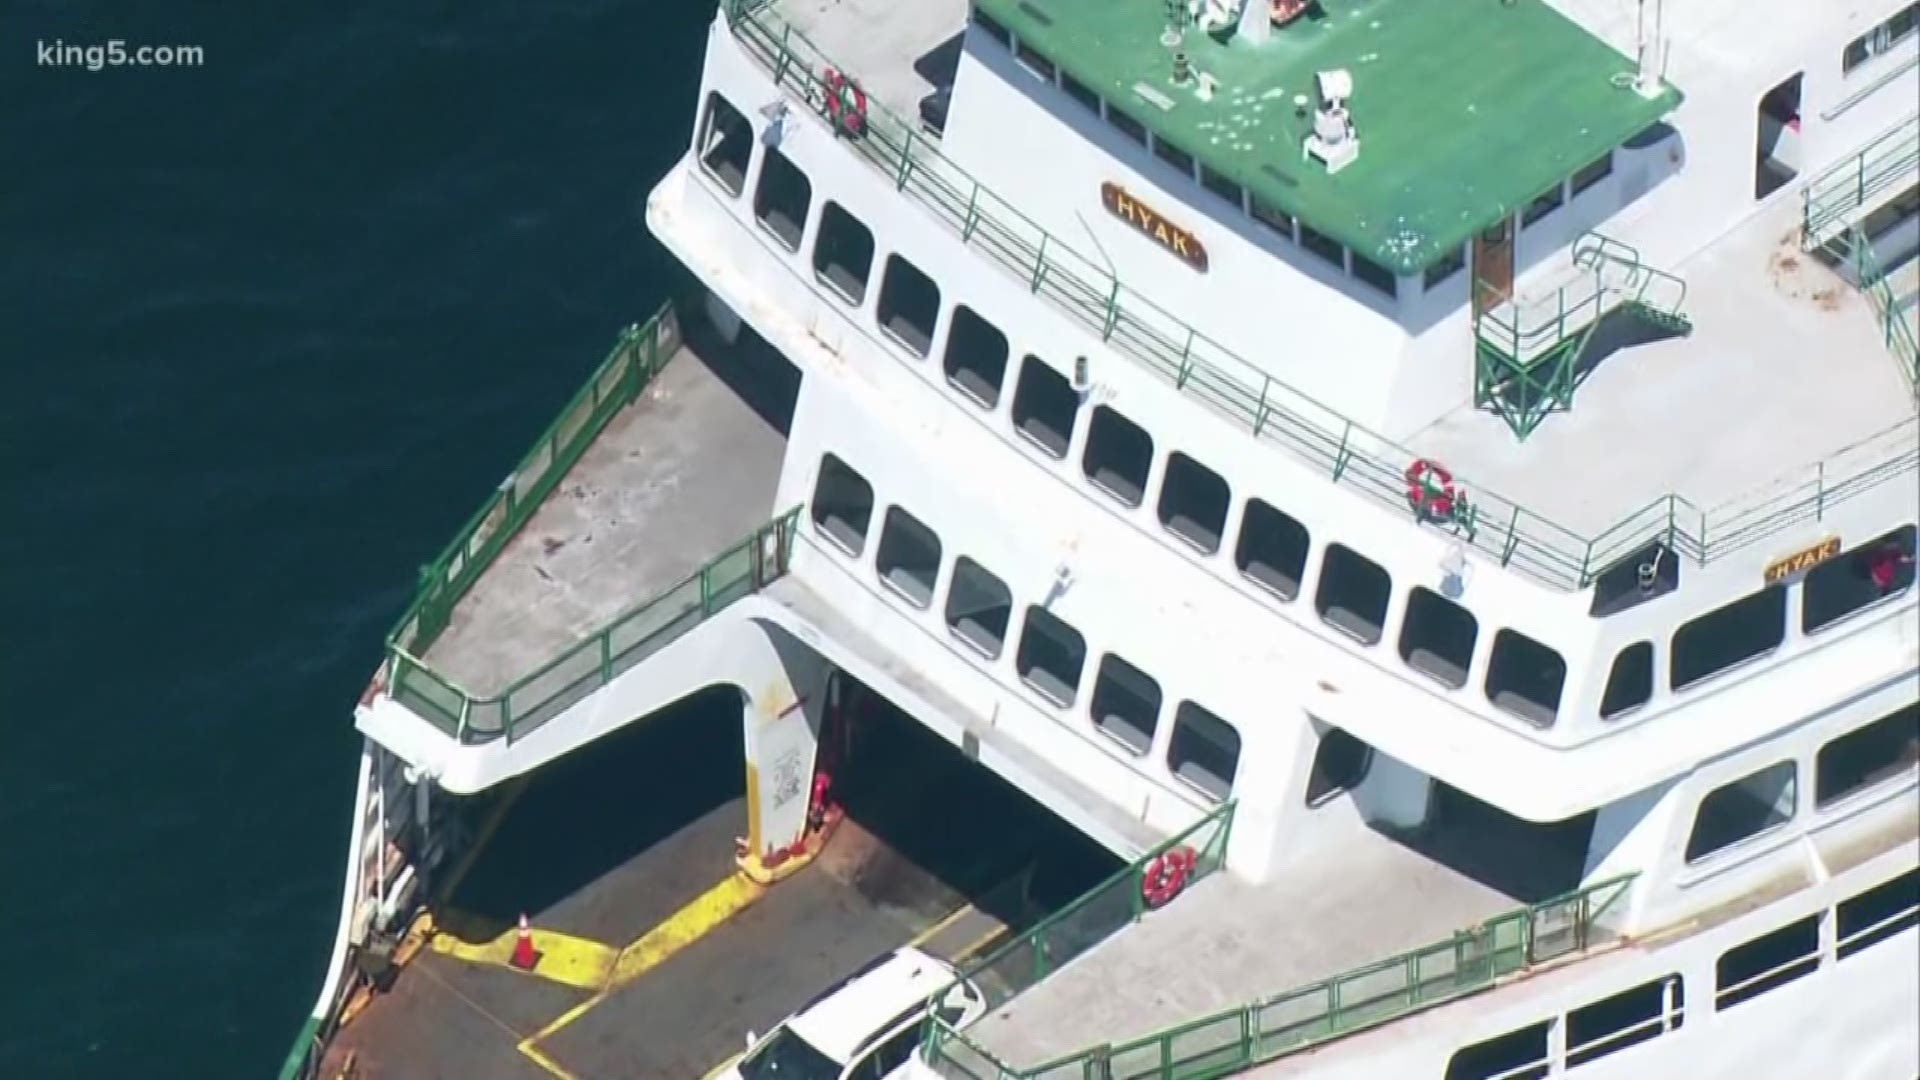 Washington State Ferries decided to decommission the vessel.